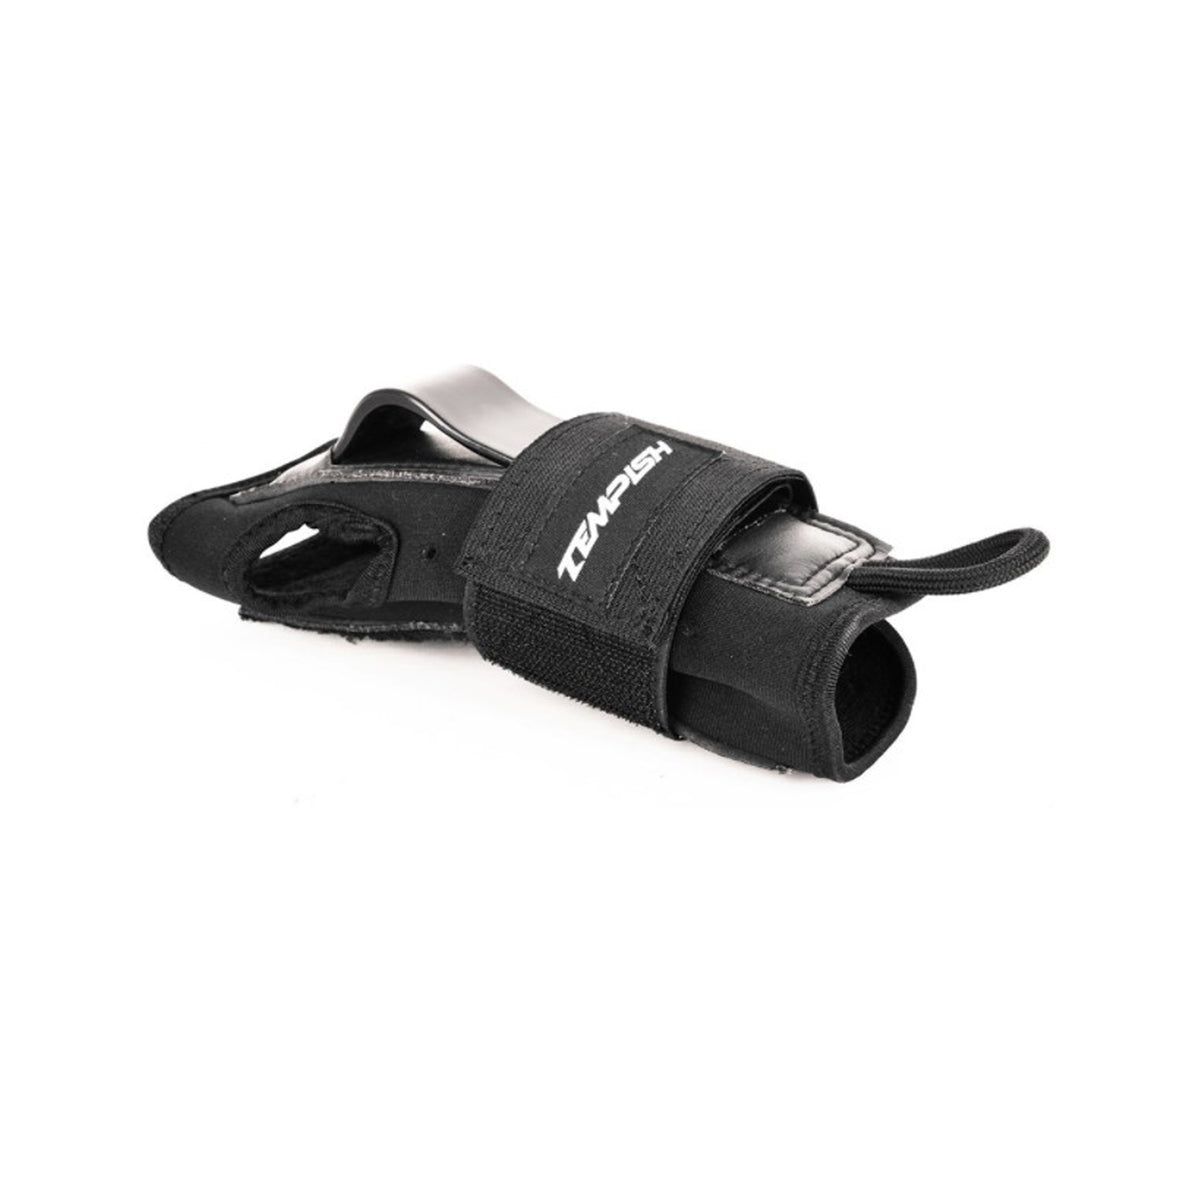 Tempish Acura Wrist Guards - Roller Skates Parts and Accessories | JT Skate